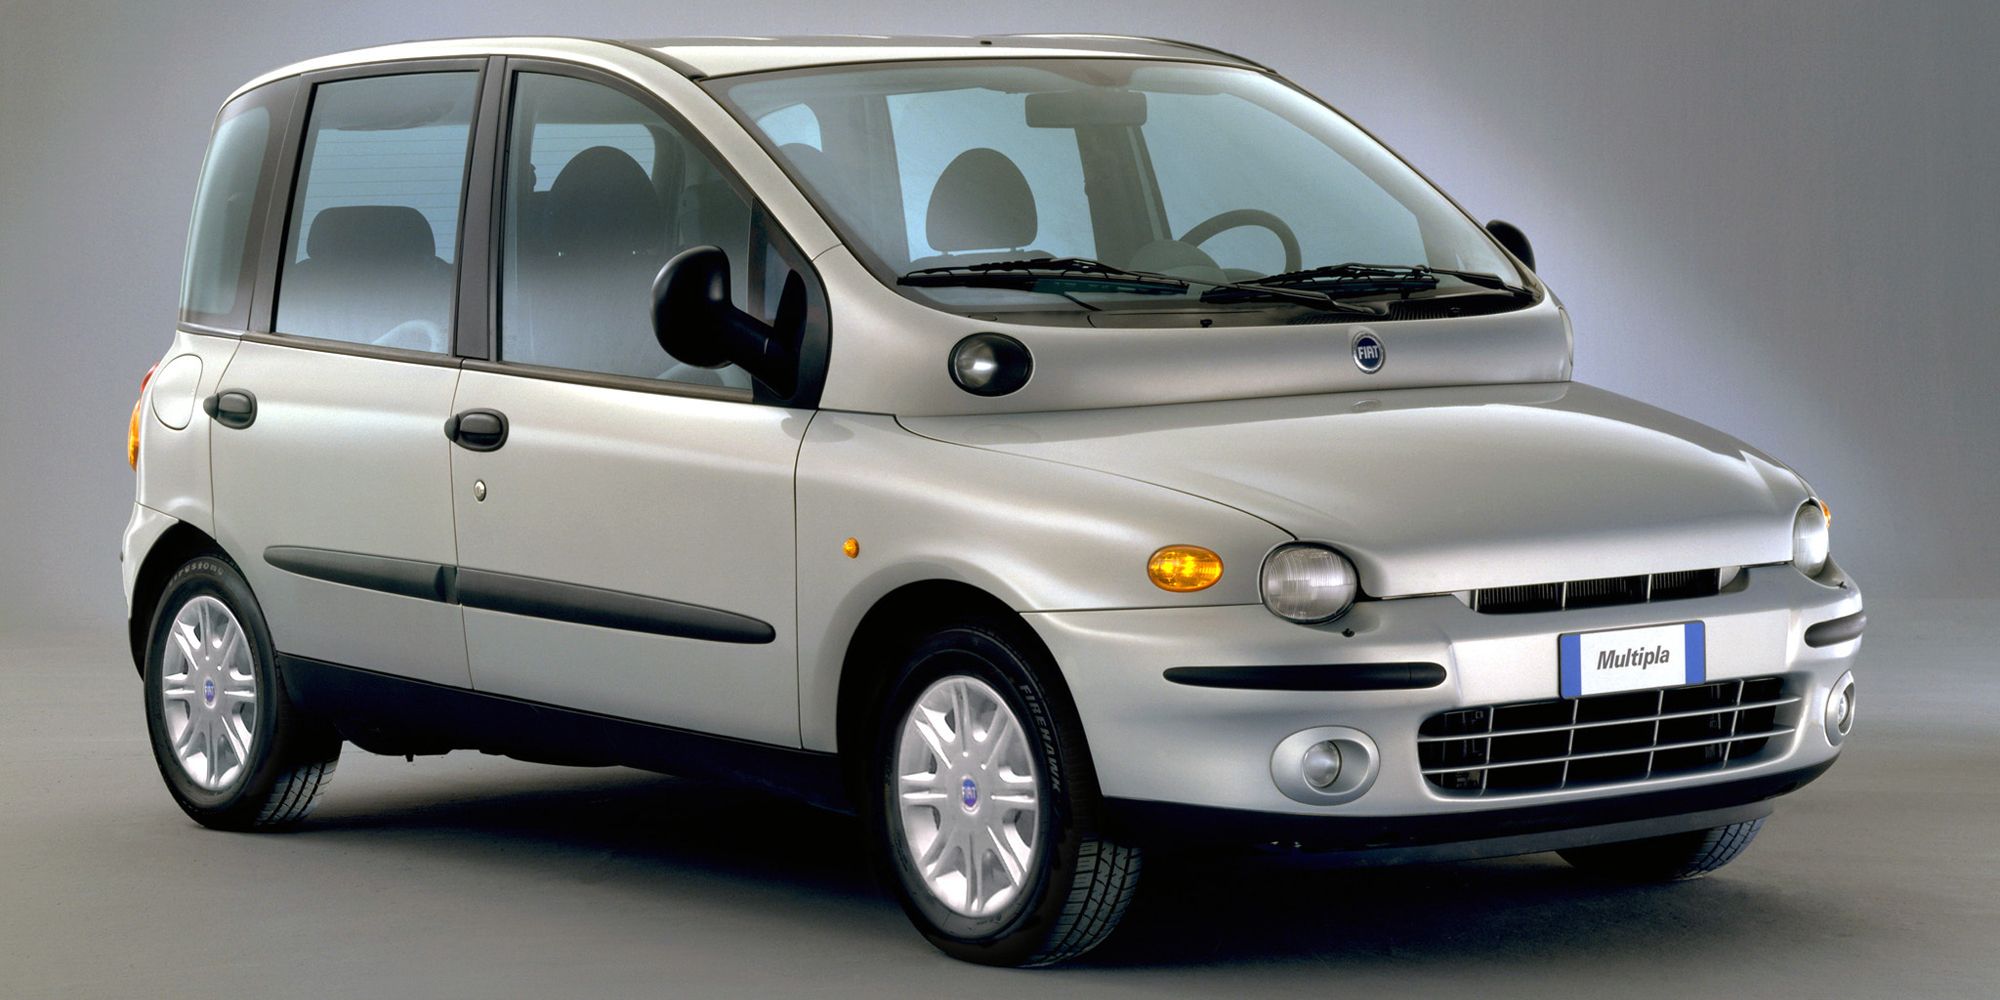 Front 3/4 view of the Multipla in silver